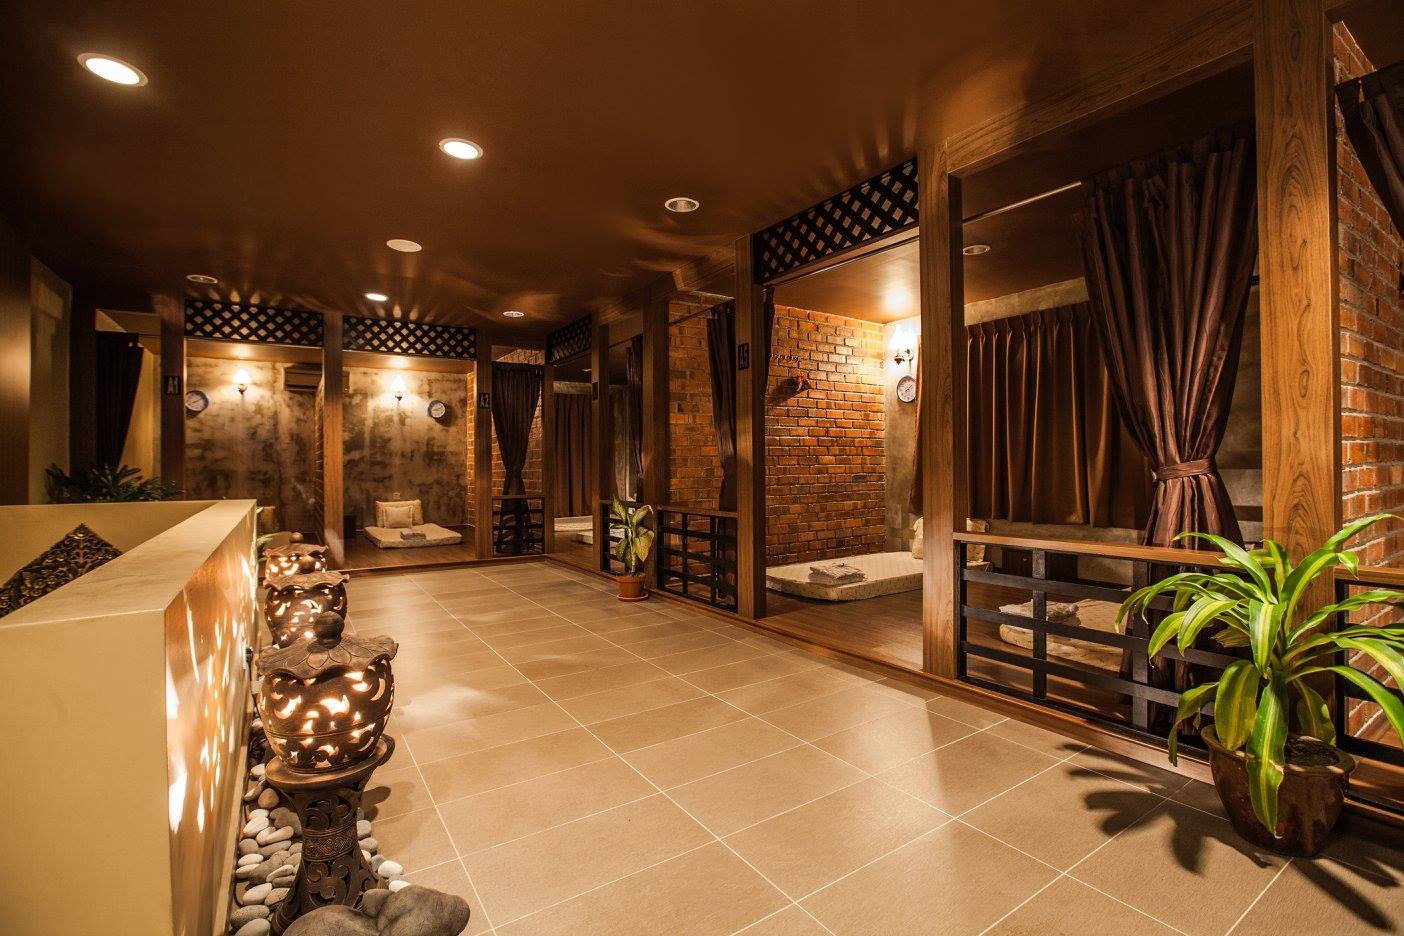 7 Spa Centers To Enjoy A Soothing Thai Massage In Johor Bahru – Johor Now